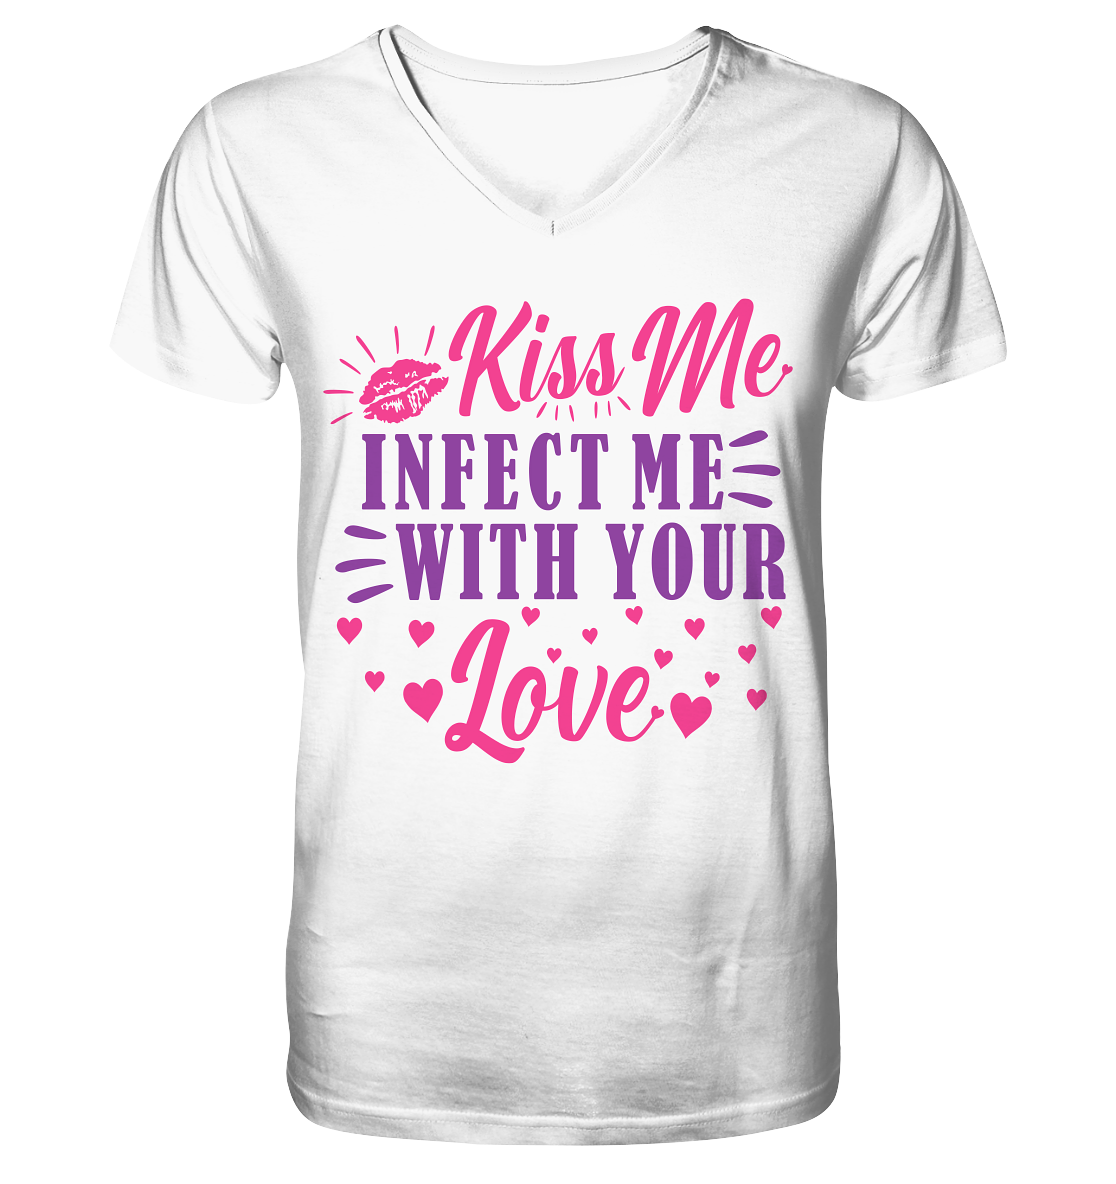 Kiss me infect me with your love - V-Neck Shirt